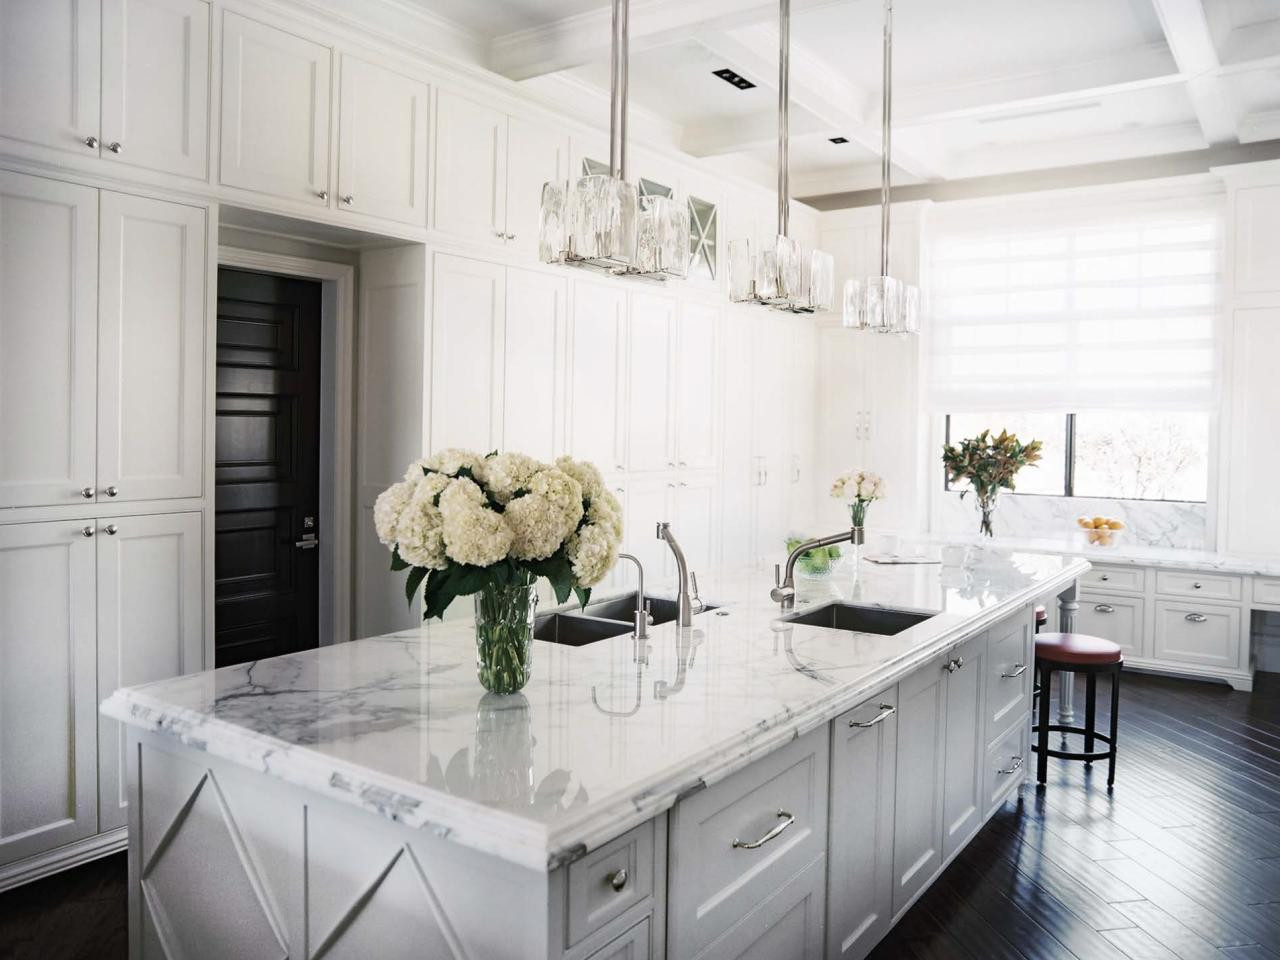 Kitchen Ideas White
 Kitchen Remodels With White Cabinets